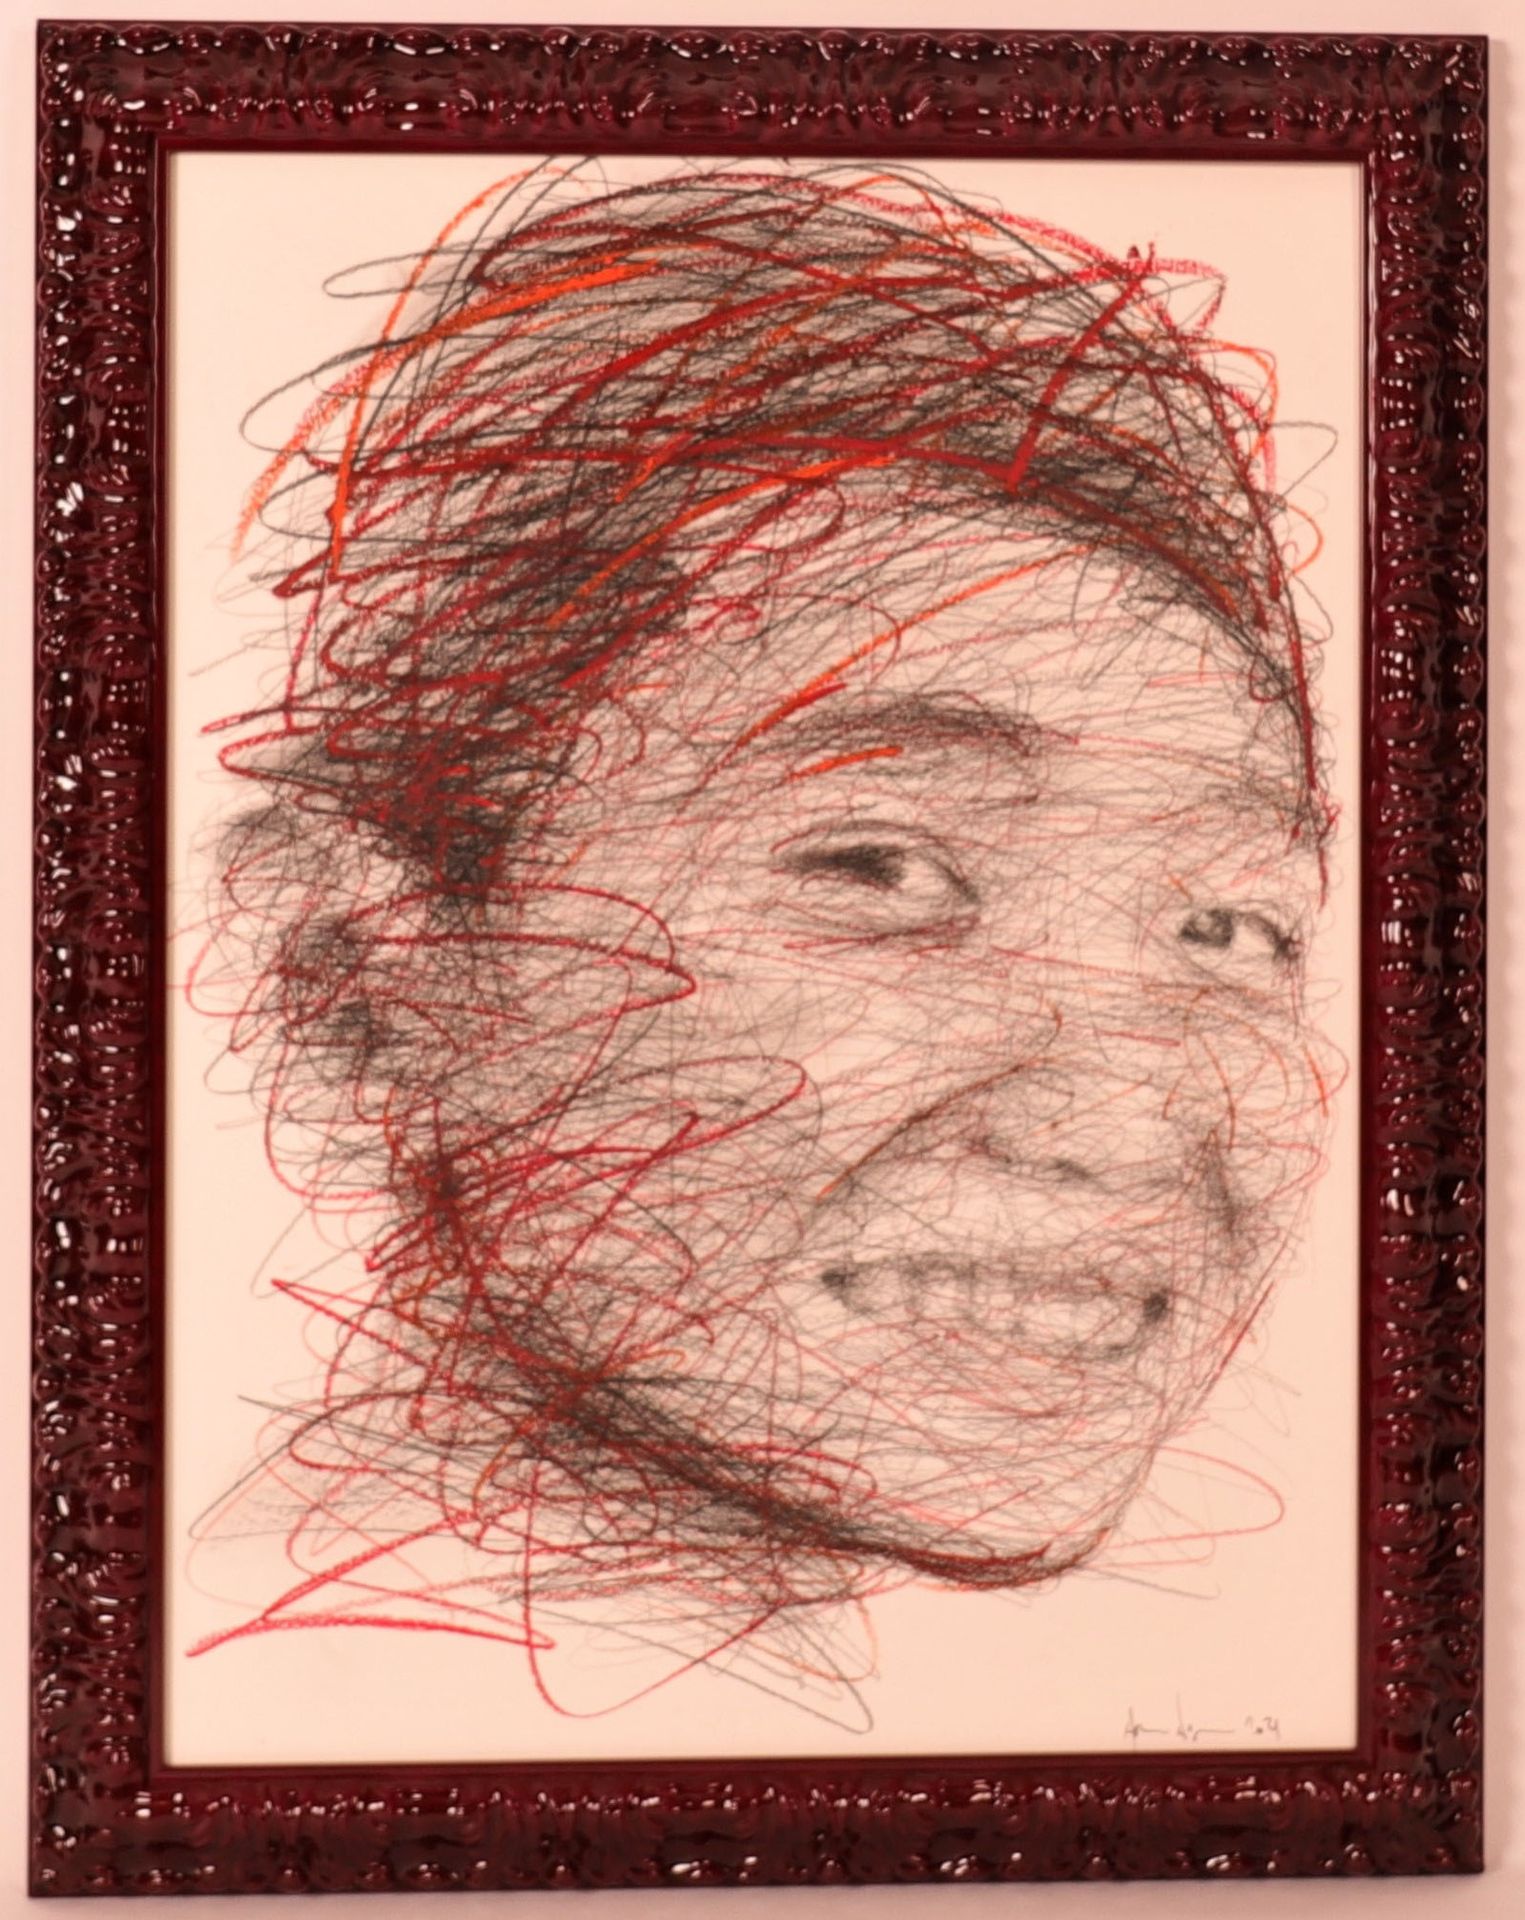 Null TABLEAU "THE RED SMILE" by Hom NGUYEN (born in 1972)

Mixed media on paper,&hellip;